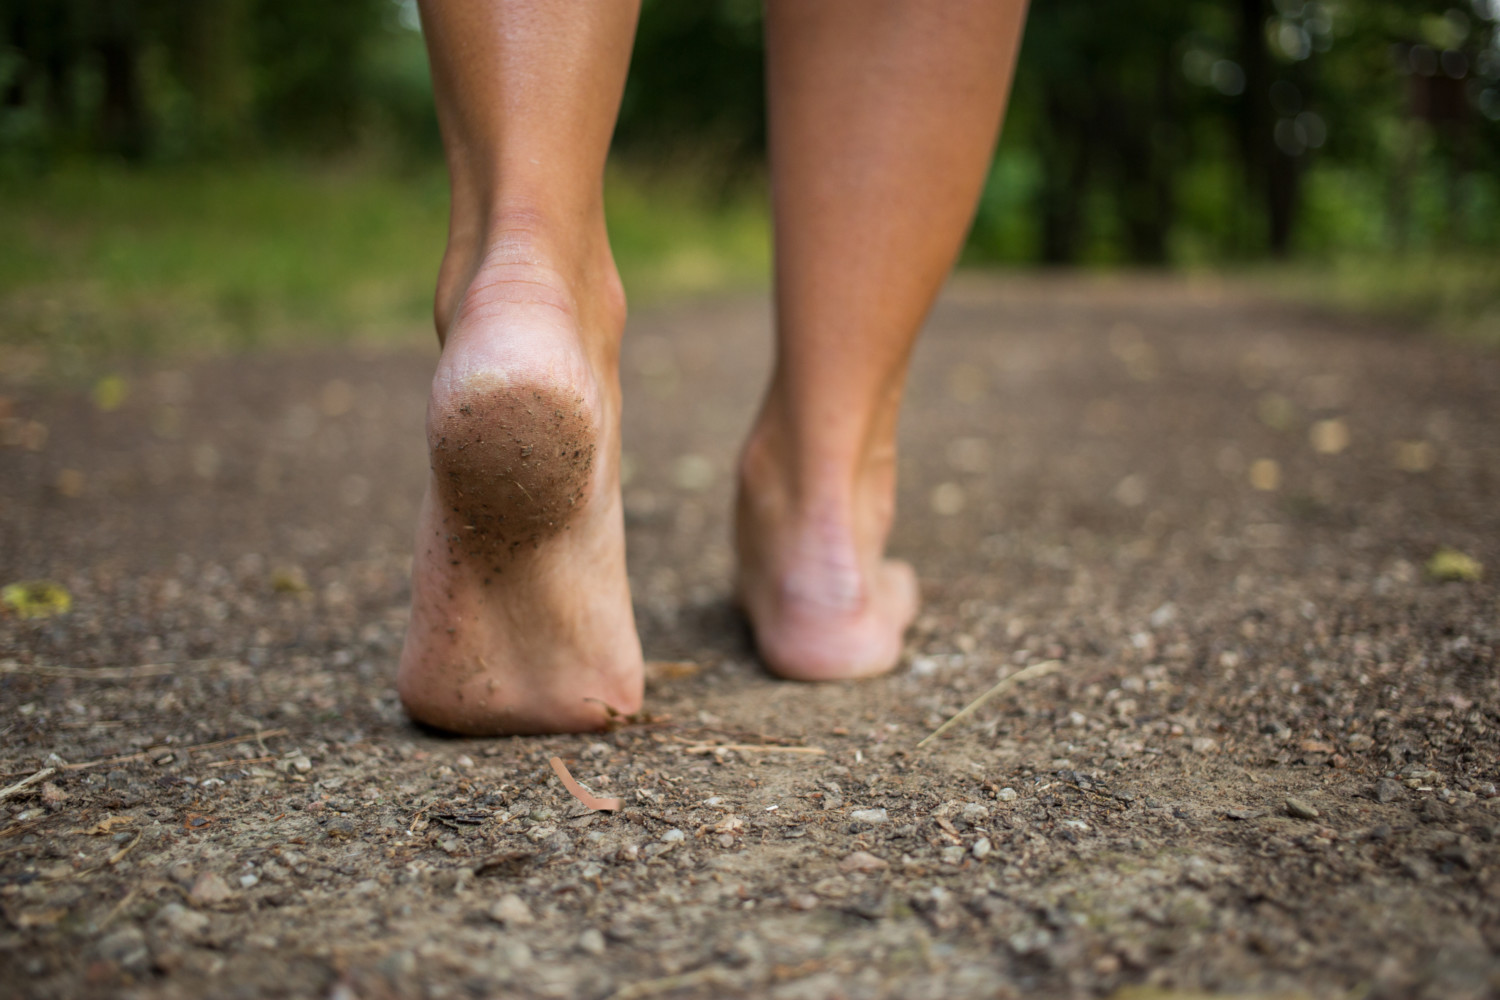 person’s feet shown walking on dirt road